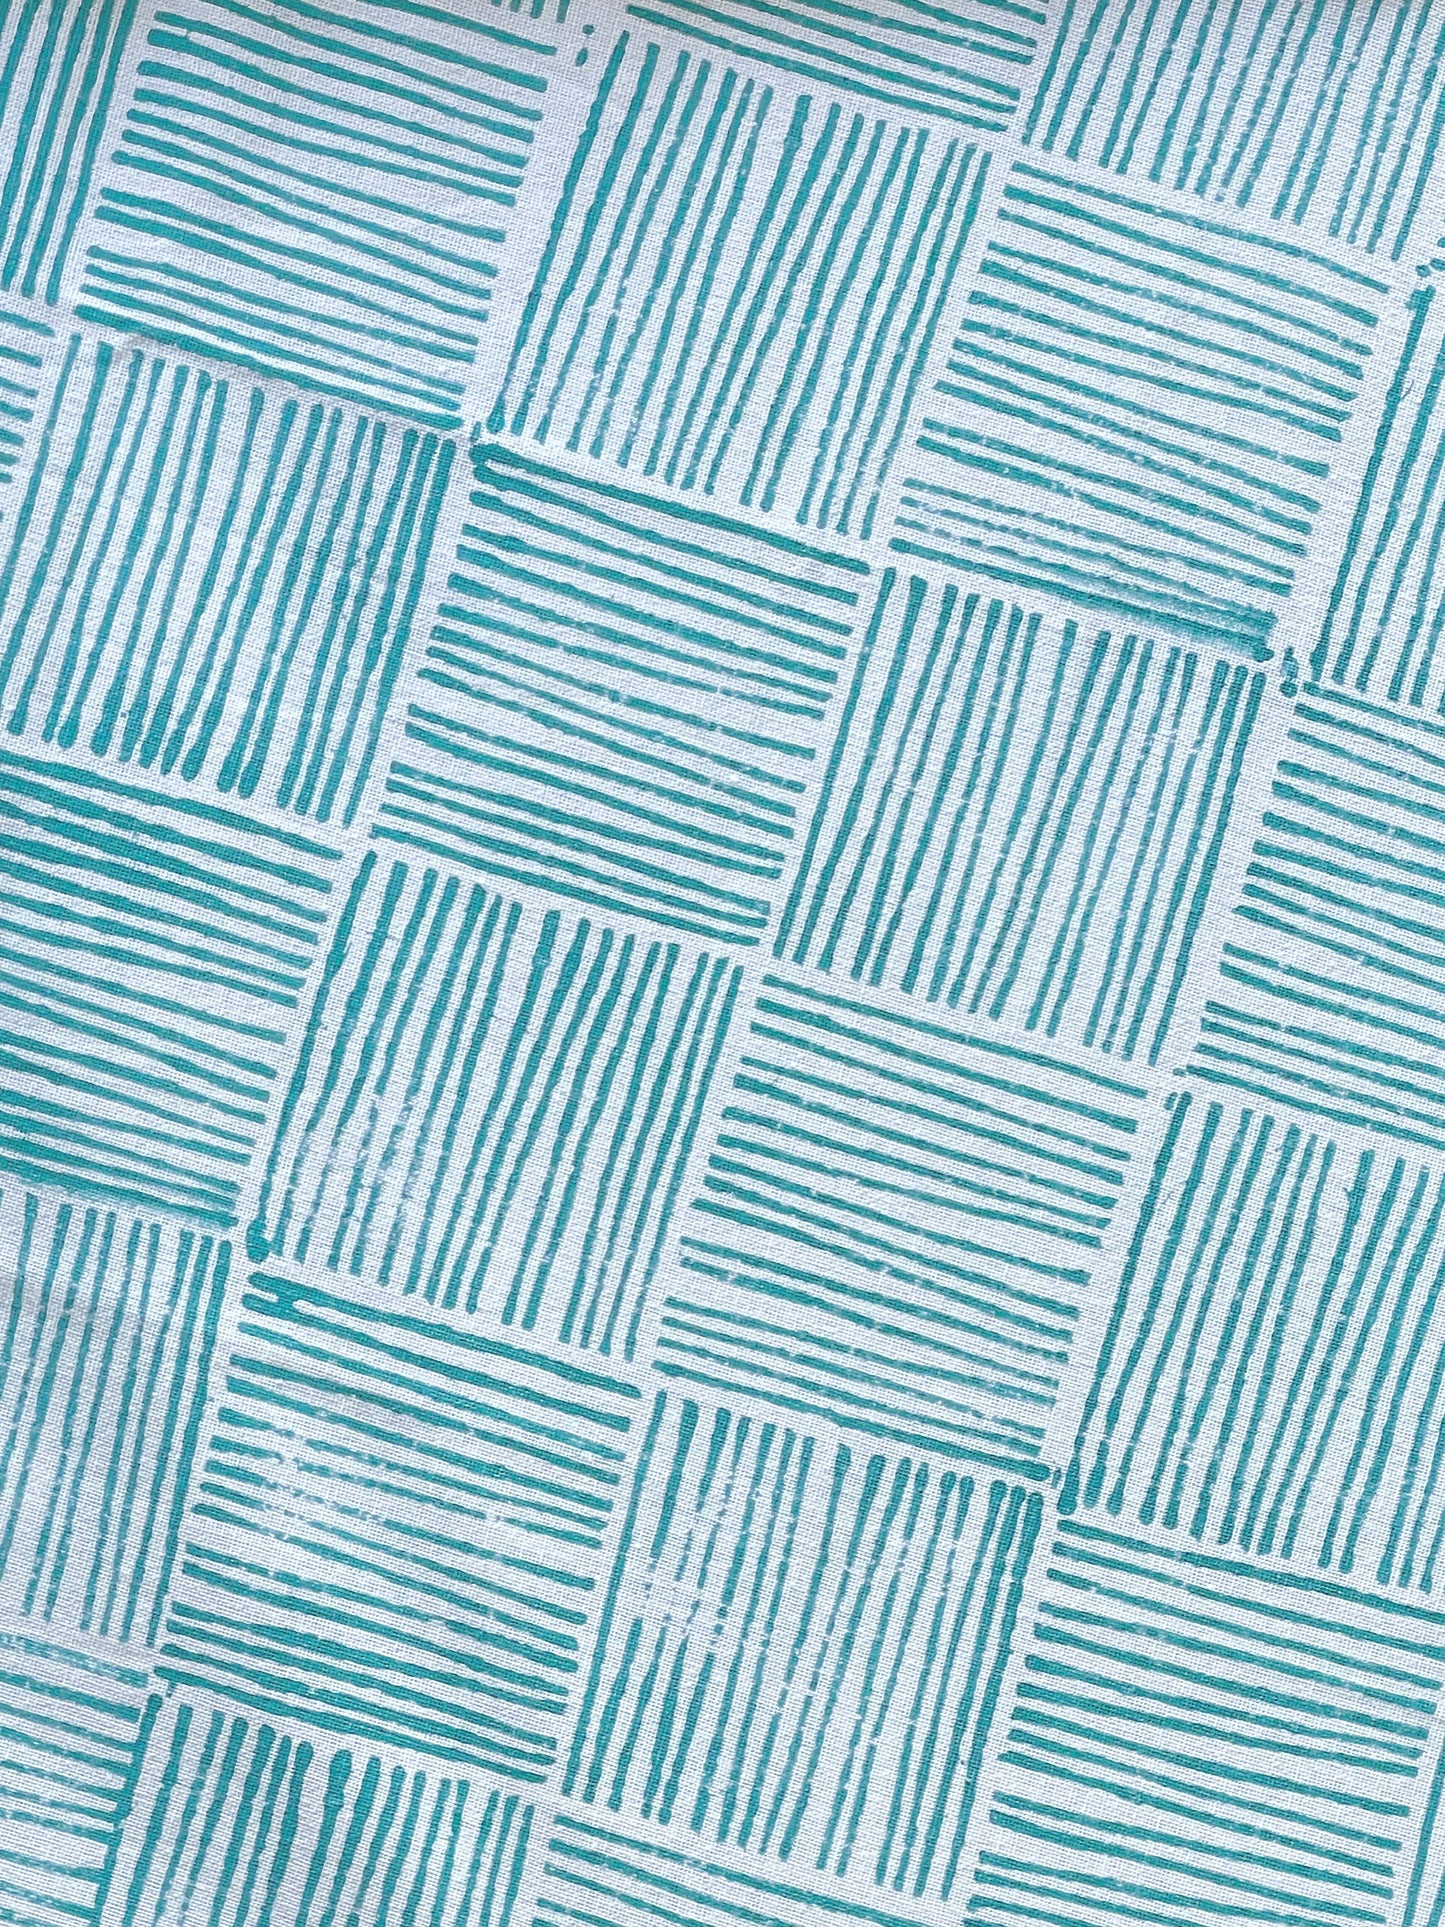 Table Runner - Striped, Saltwater